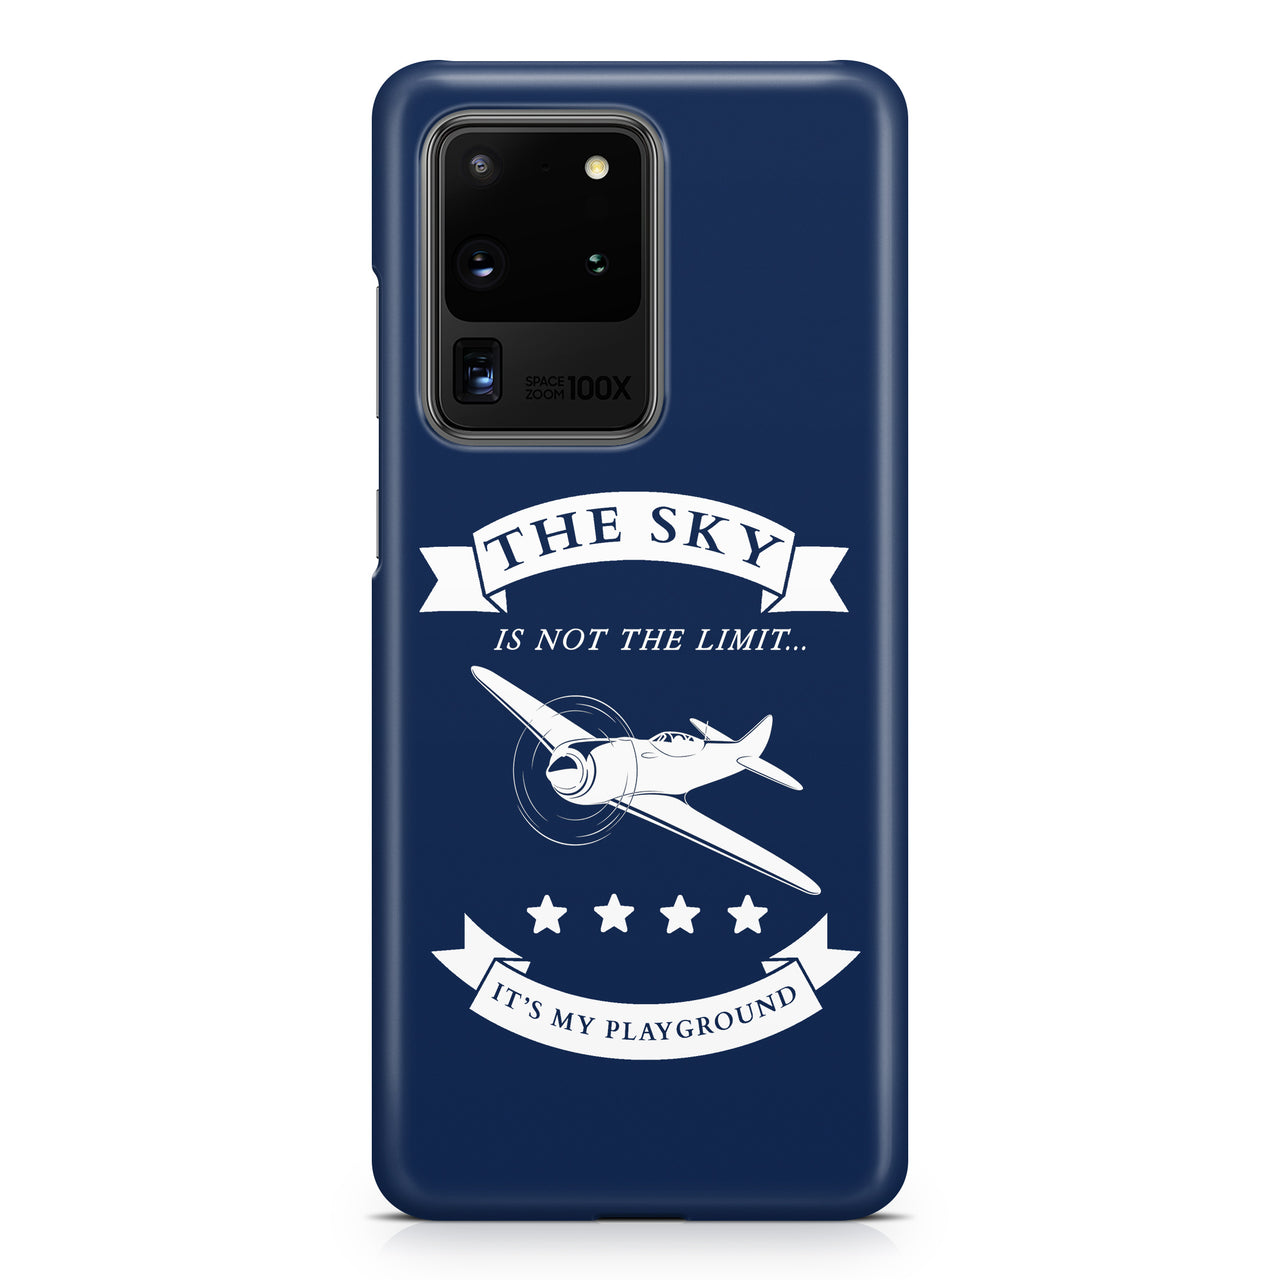 The Sky is not the limit, It's my playground Samsung A Cases